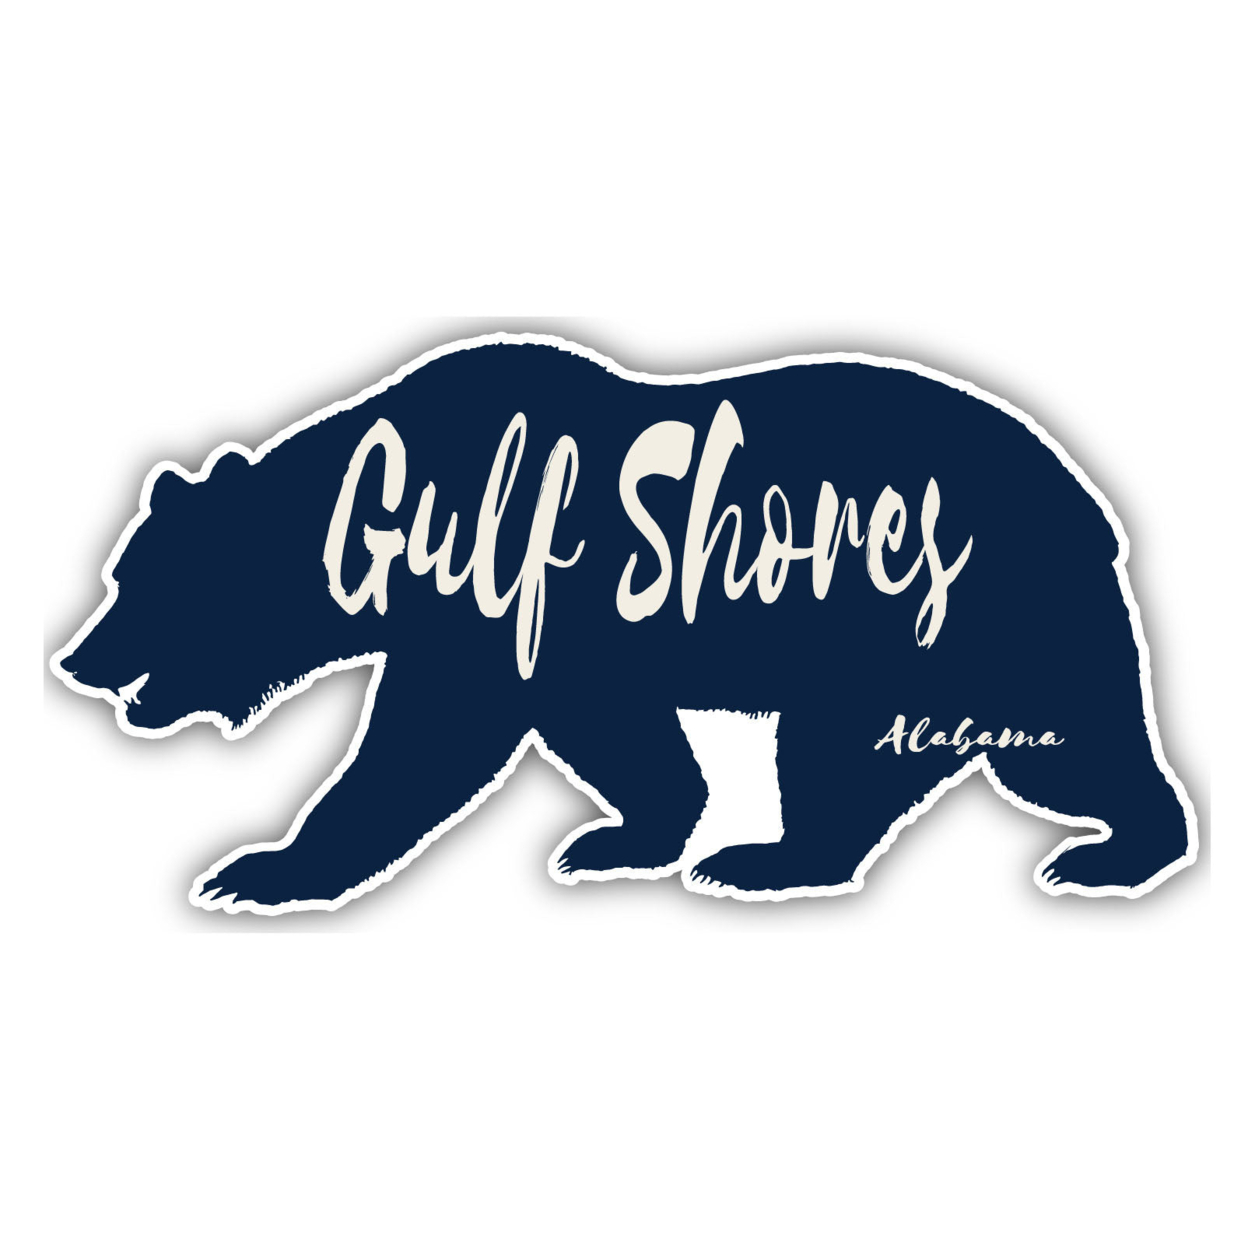 Gulf Shores Alabama Souvenir Decorative Stickers (Choose Theme And Size) - 4-Pack, 12-Inch, Camp Life